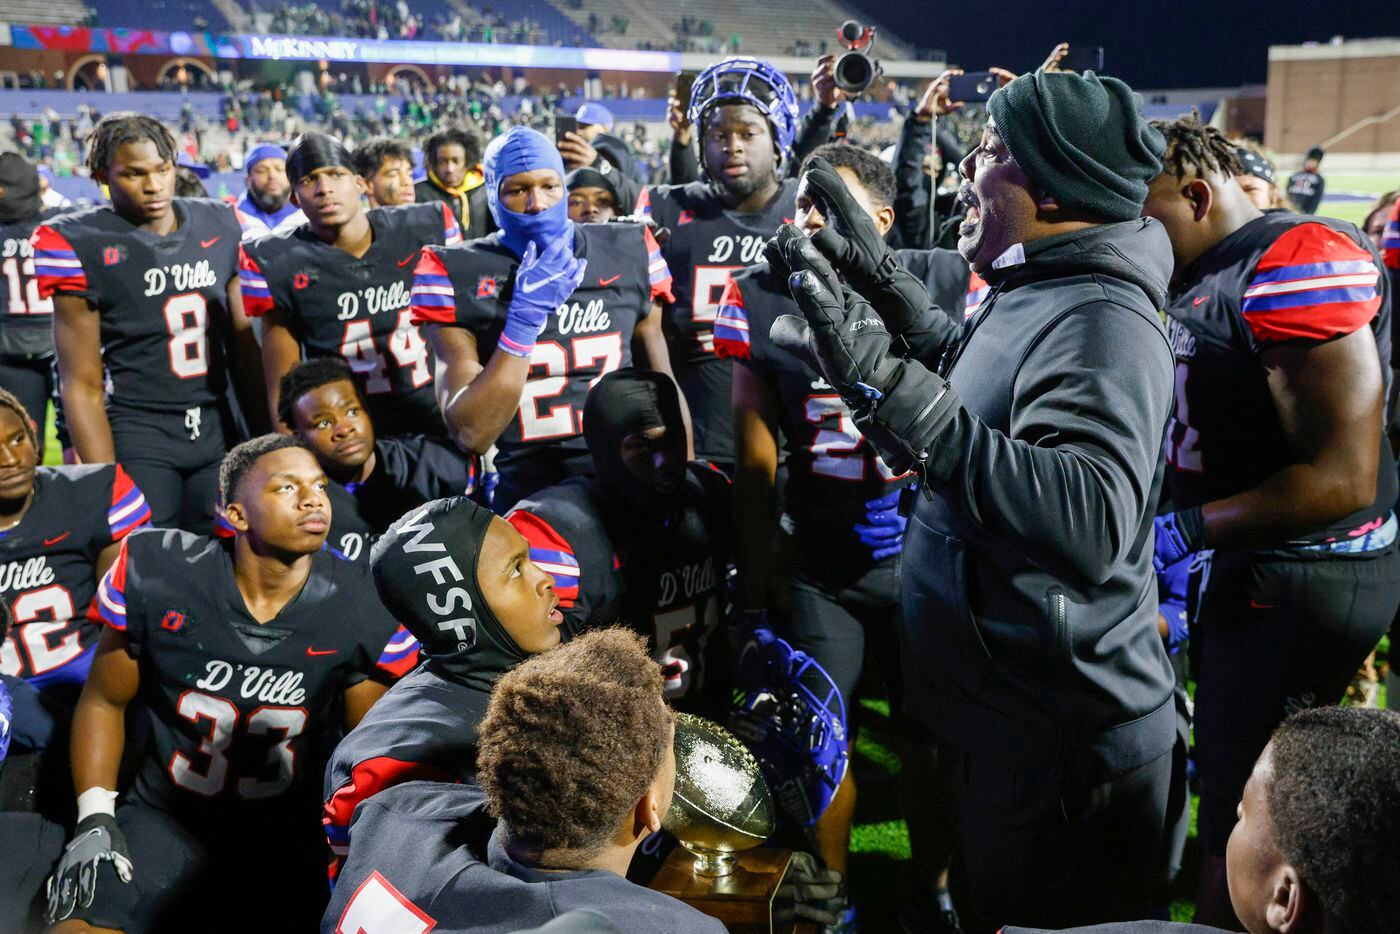 Duncanville head coach Reginald Samples speaks with players after defeating Southlake Carroll in their Class 6A Division I state semifinal playoff game at McKinney ISD Stadium in McKinney, Texas, Saturday, Dec. 11, 2021. Duncanville defeated Southlake Carroll 35-9. (Elias Valverde II/The Dallas Morning News)